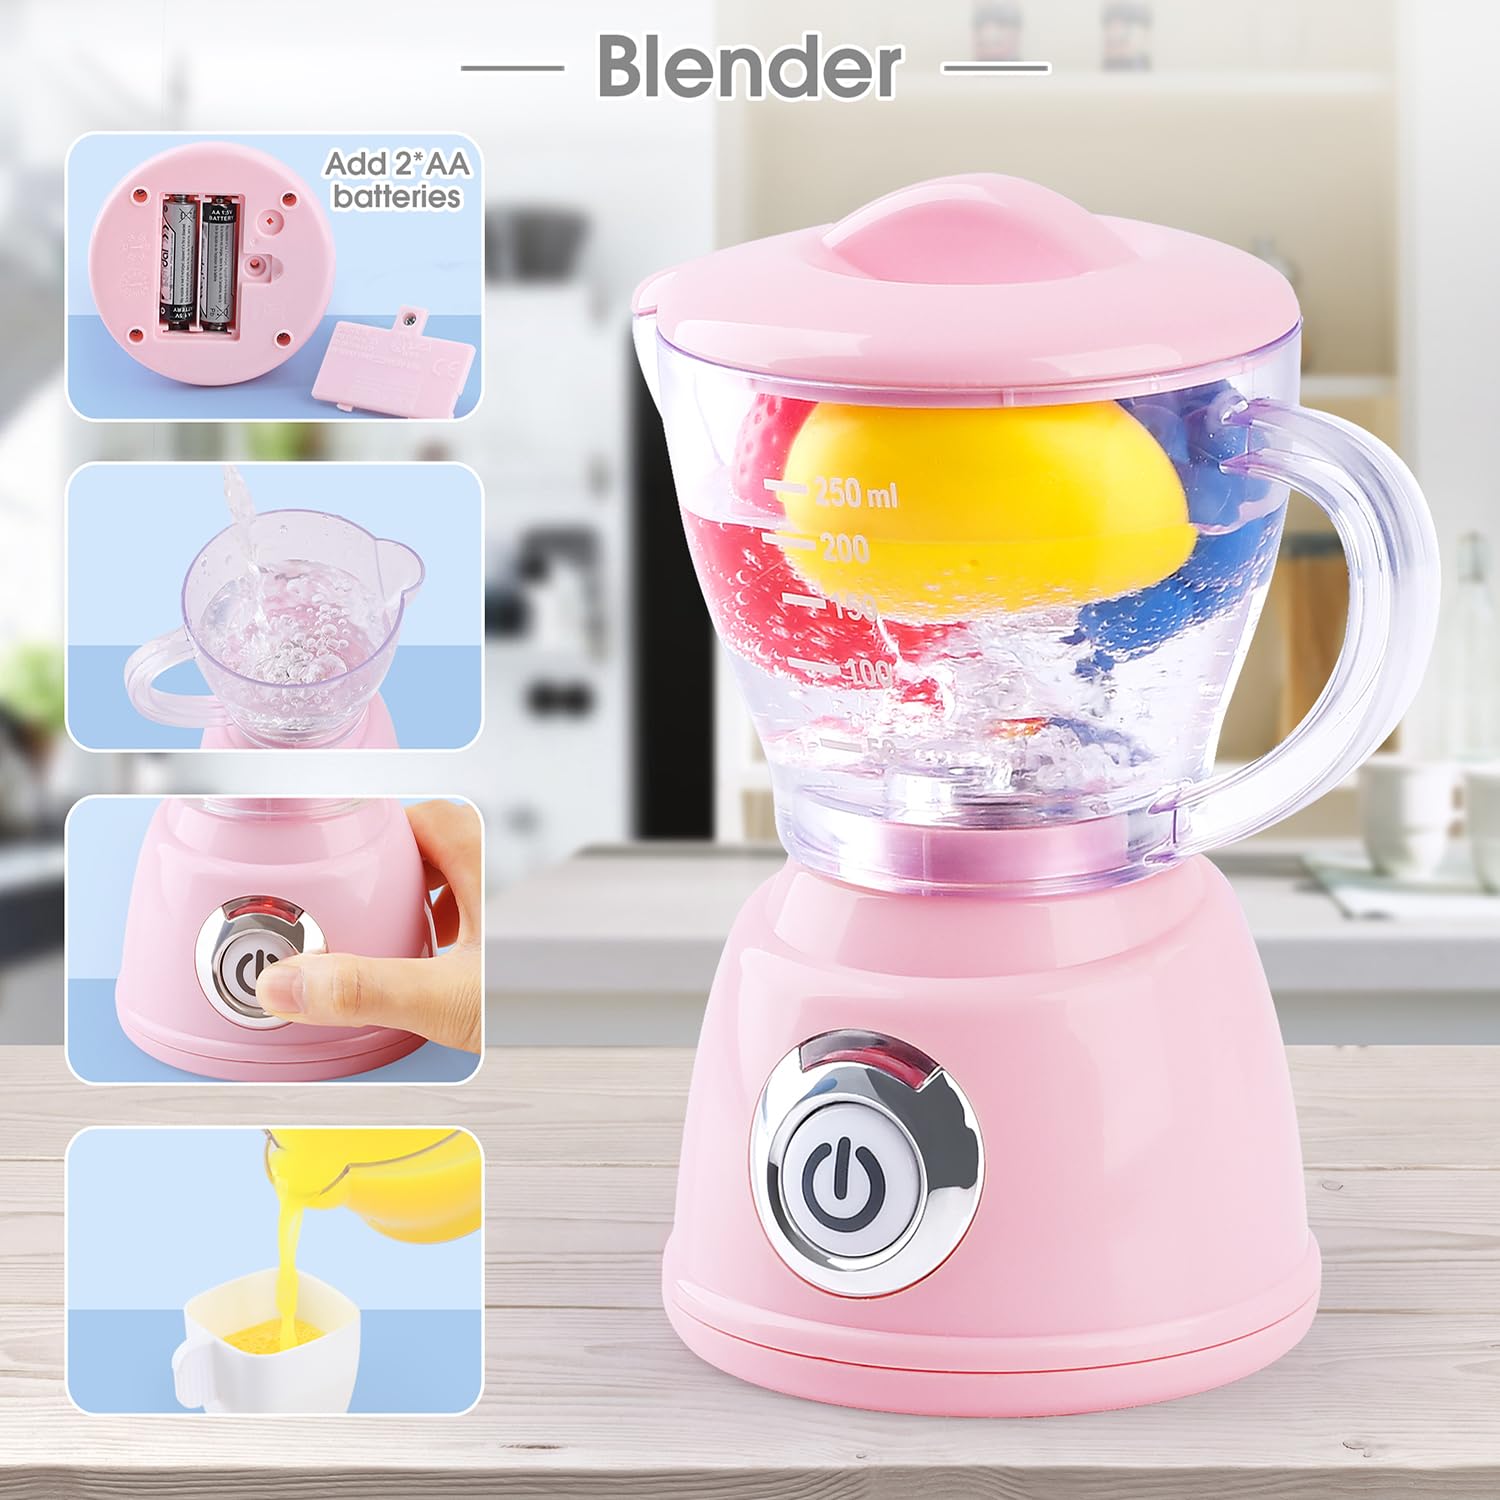 Kids Toy Kitchen Sets, Play Kitchen Accessories for Kids Ages 4-8 3-5, Kitchen Appliance Toys, Blender, Coffee Maker Machine, Mixer, Toaster, Pretend Play Toys for 4 Year Old Girls Toddlers 3-5